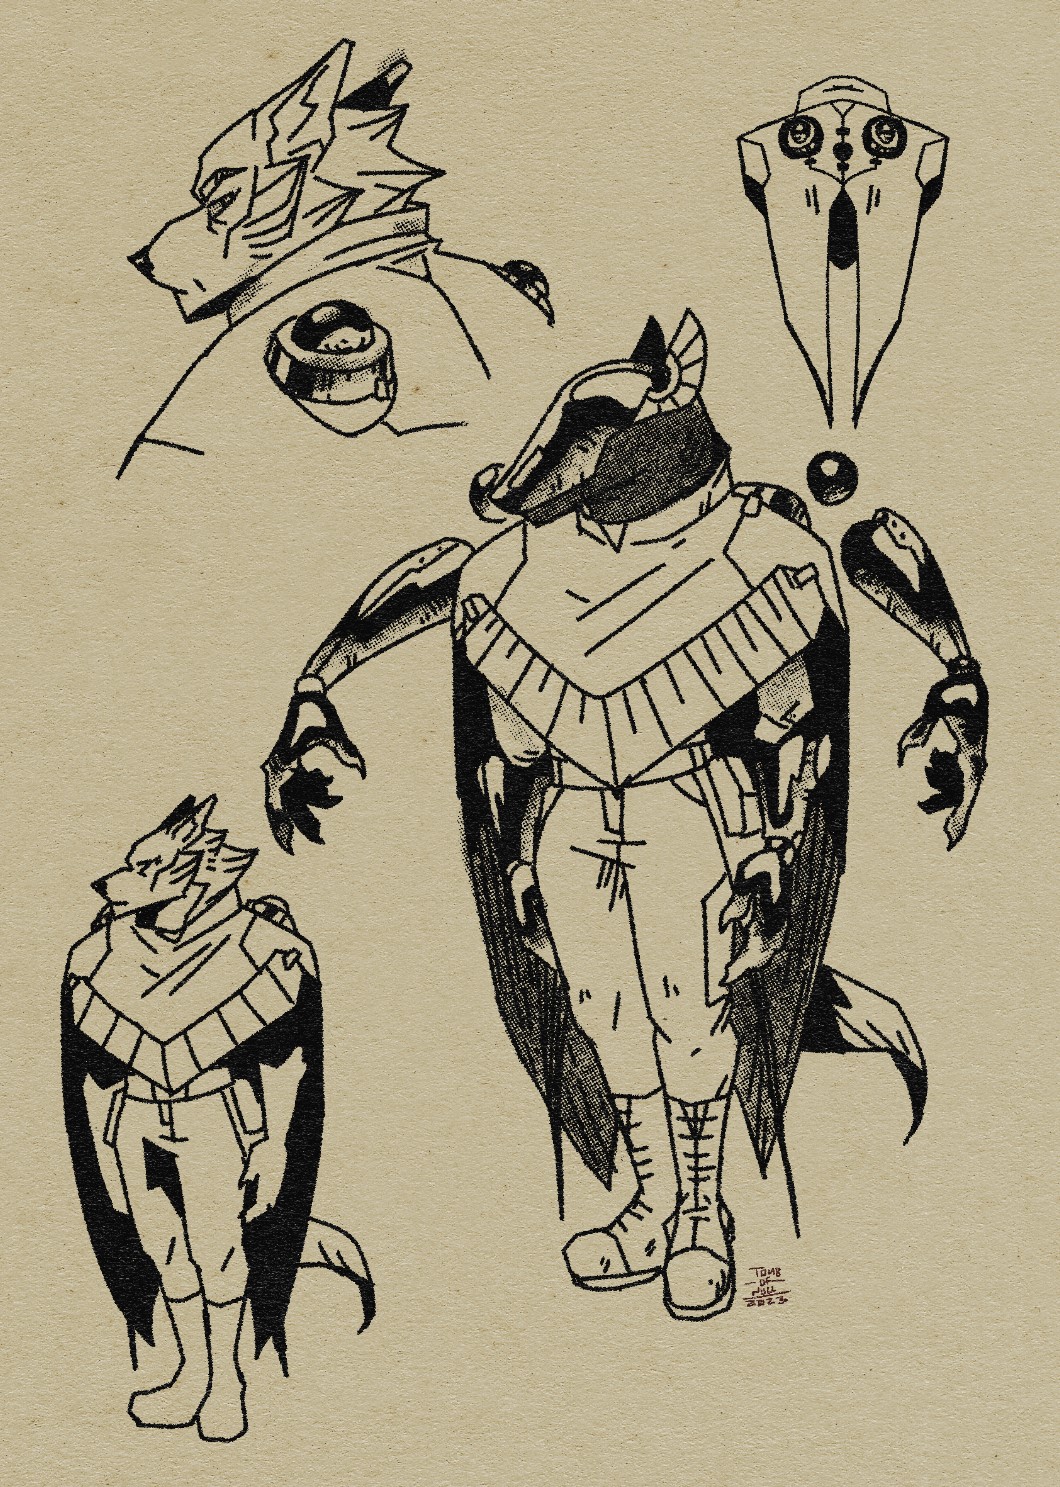 Several black and white illustrations. Front the top down: A headshot of the figure unmasked—a older german shepard looking over his shoulder with a severe expression. Two metallic protrusion are mounted on each of his shoulder blades. Next, a back view of the cape. The cape has the same metallic protrusions. The cape has a swallow bird’s tail shape to it. Next, a front view of the full outfit, same as first image featured earlier. Finally, a similar front view of the outfit with the same dog character unmasked.